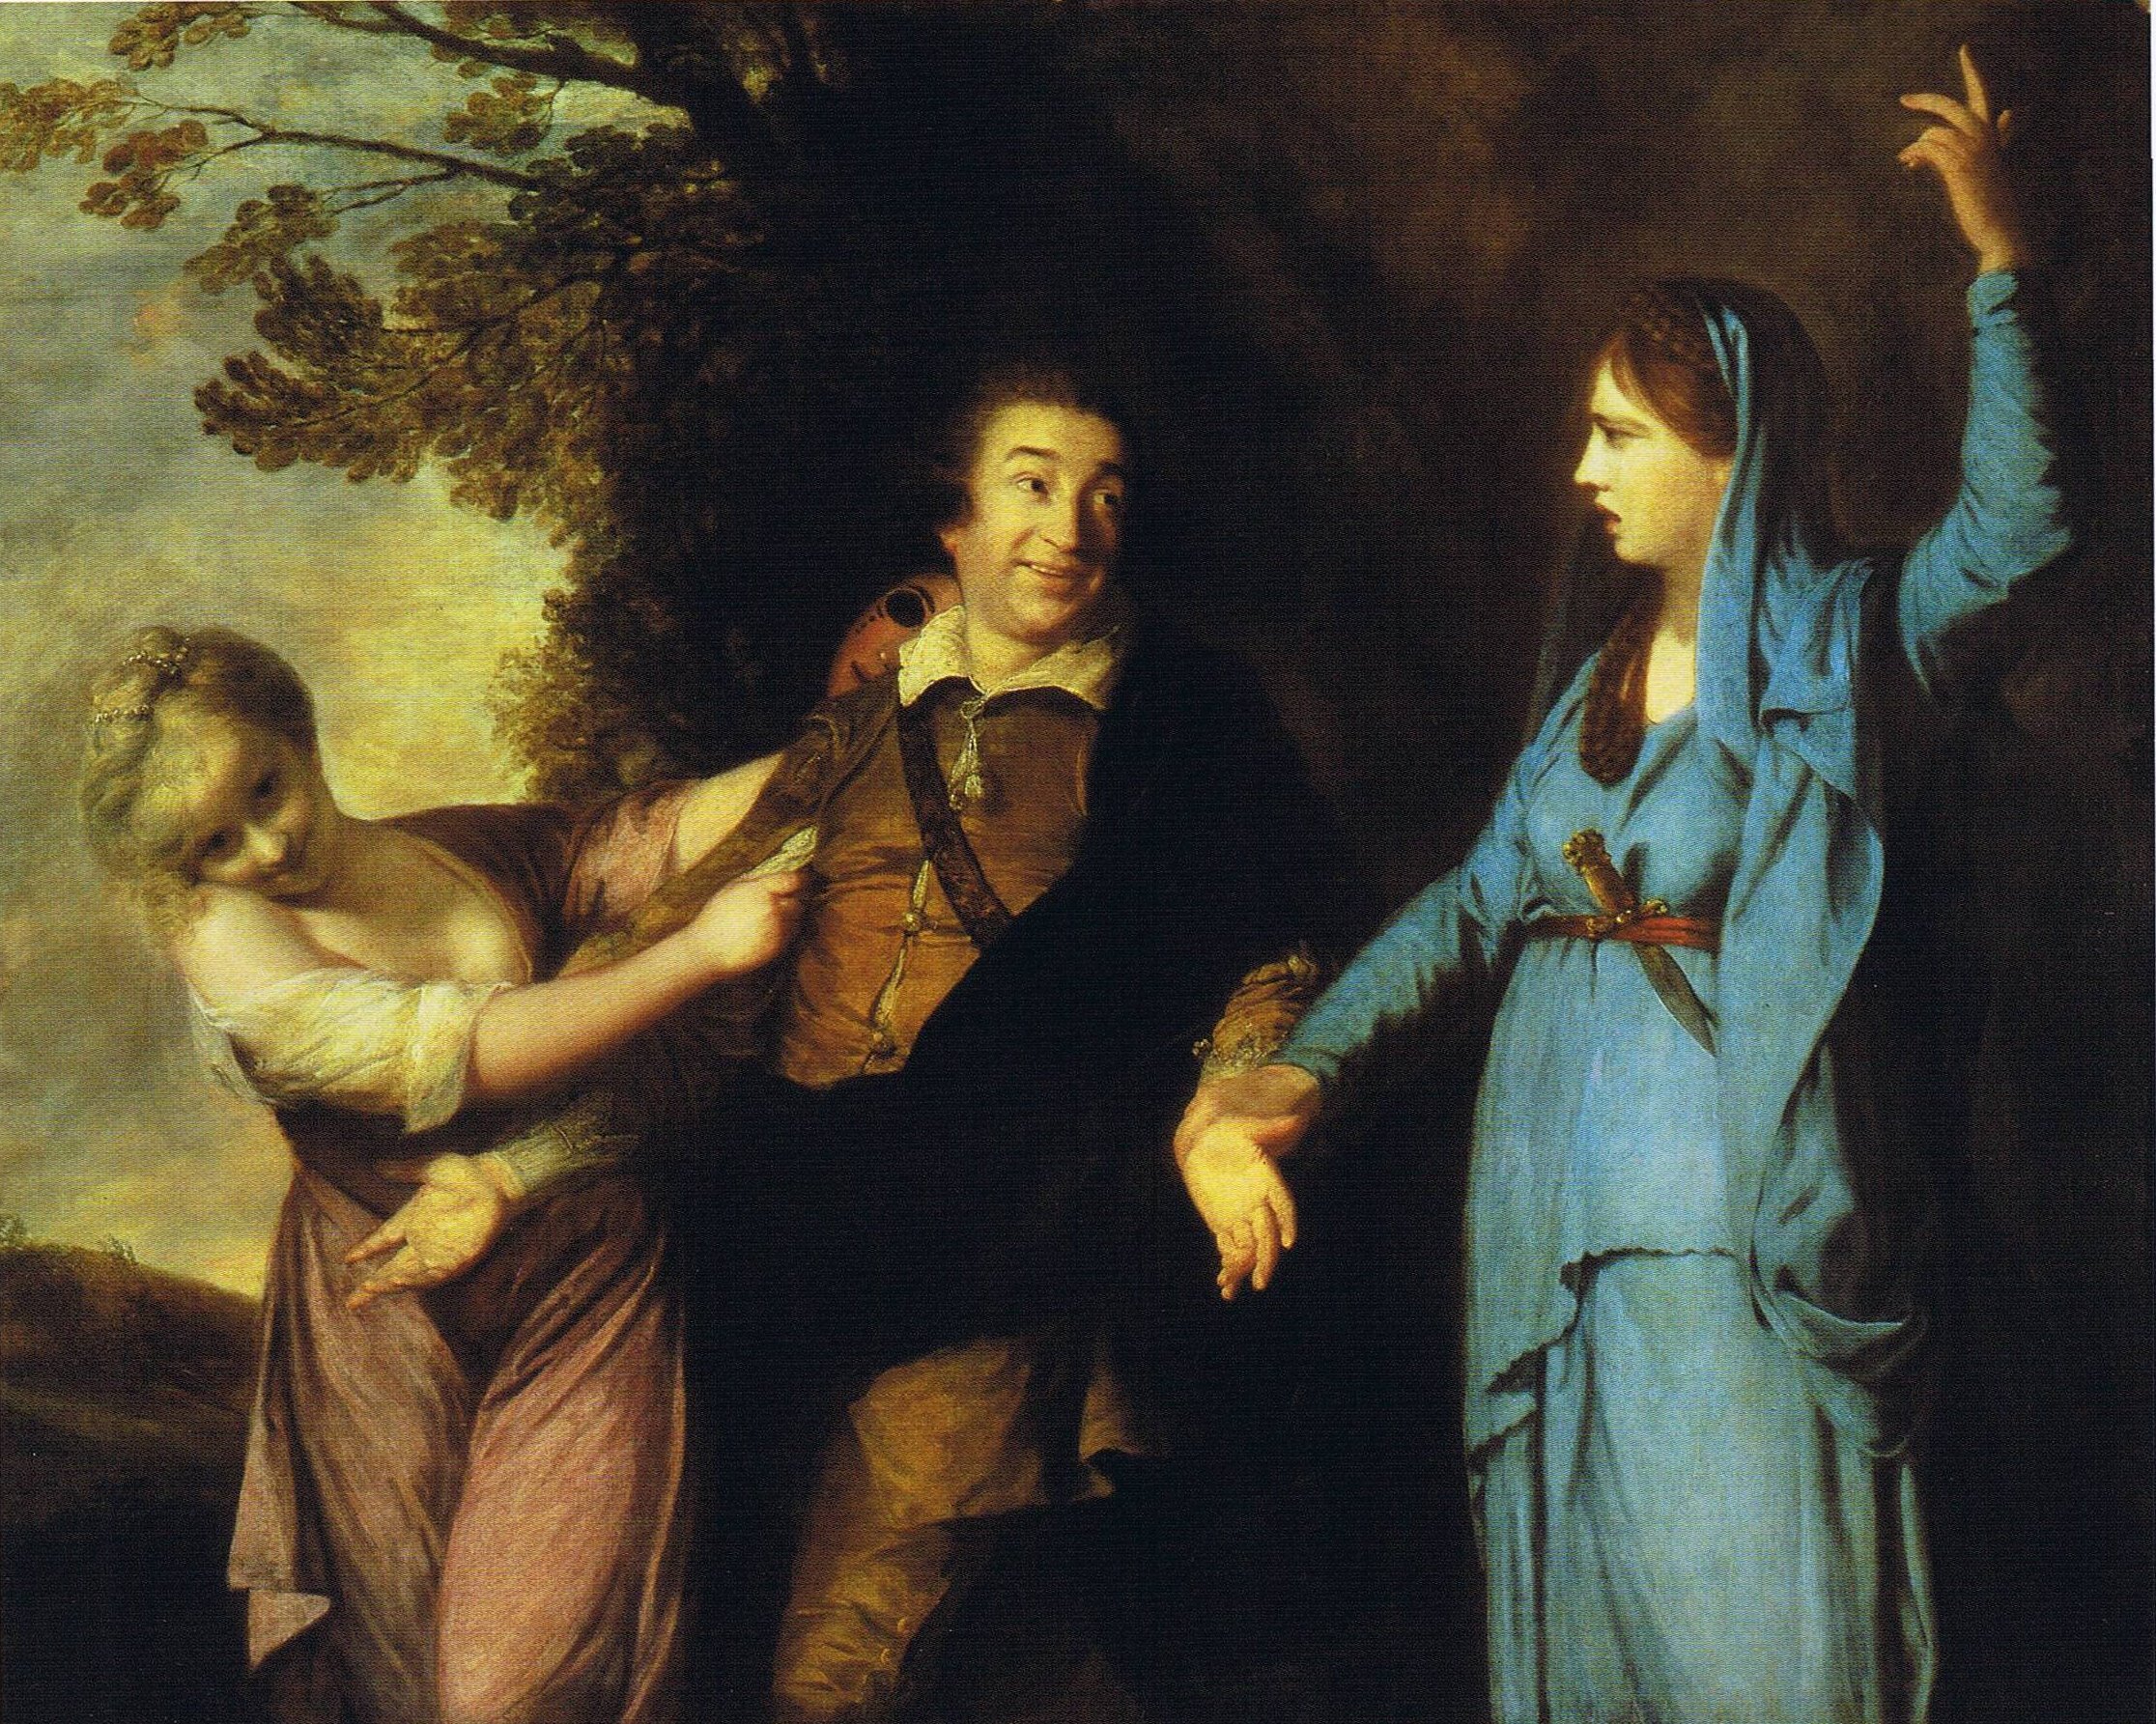 Garrick Between Tragedy and Comedy by Joshua Reynolds - 1760 - 148 x 183 cm private collection